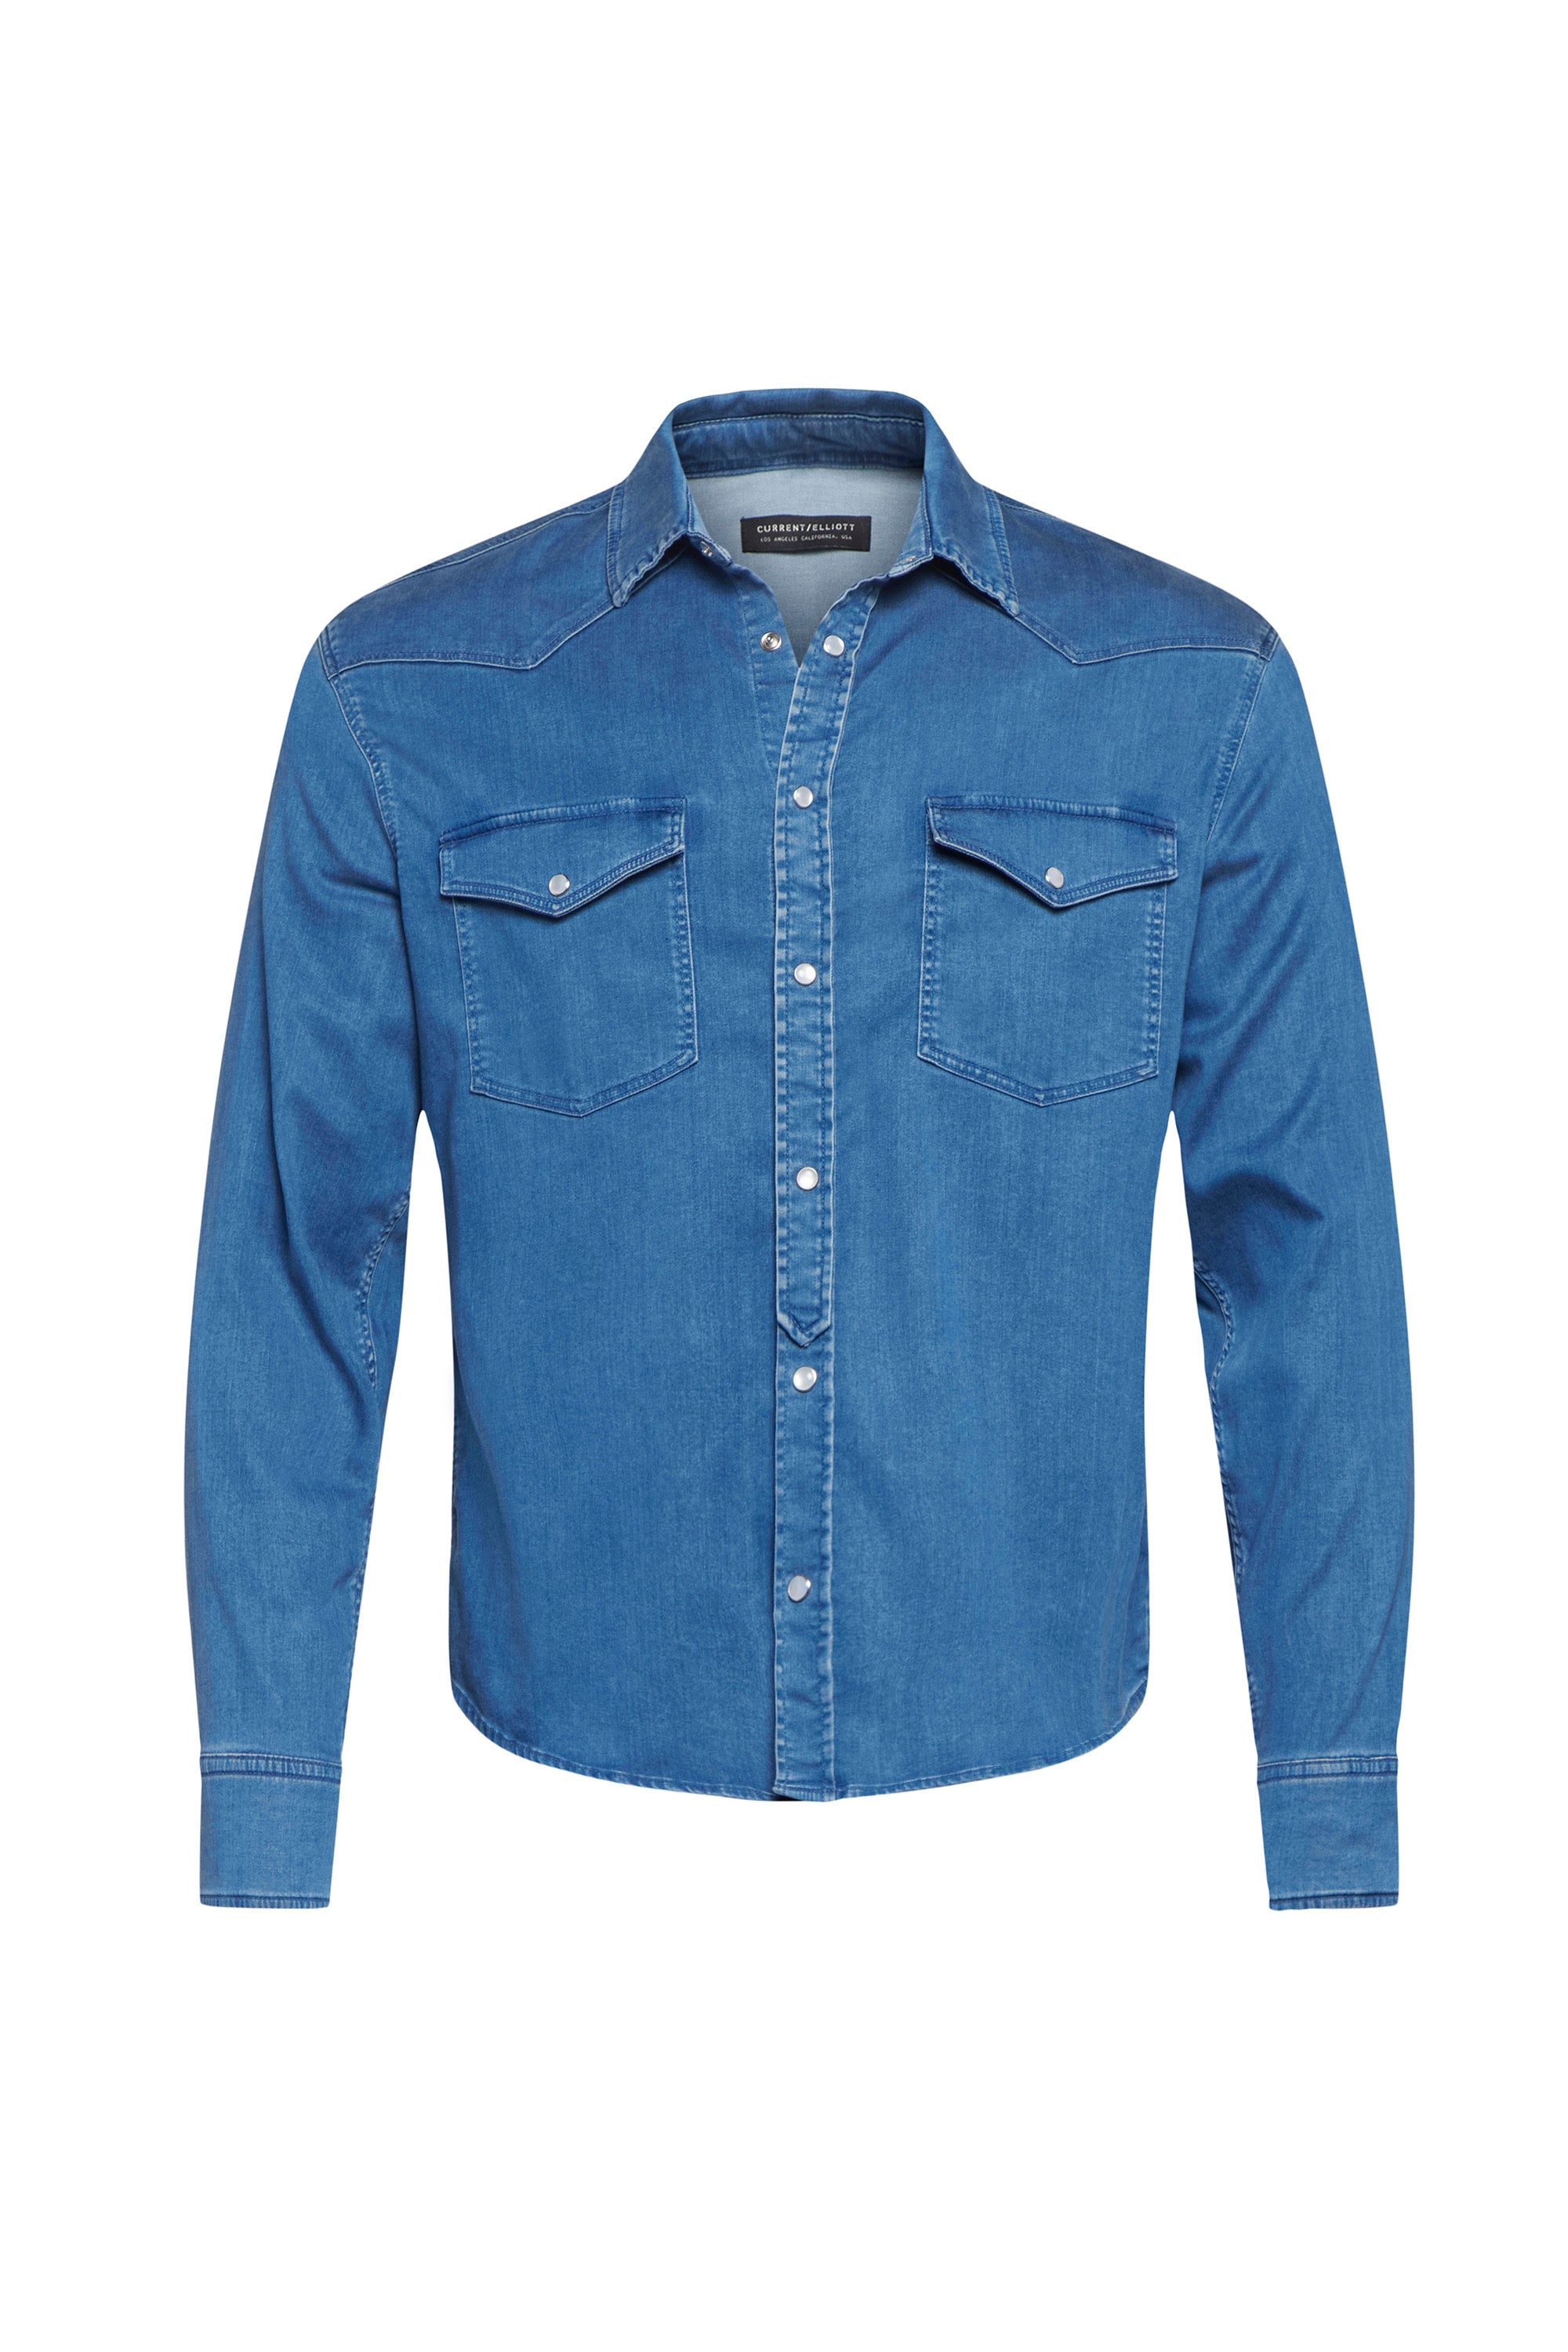 THE CLASSIC WESTERN LONG SLEEVE SHIRT - DELTA